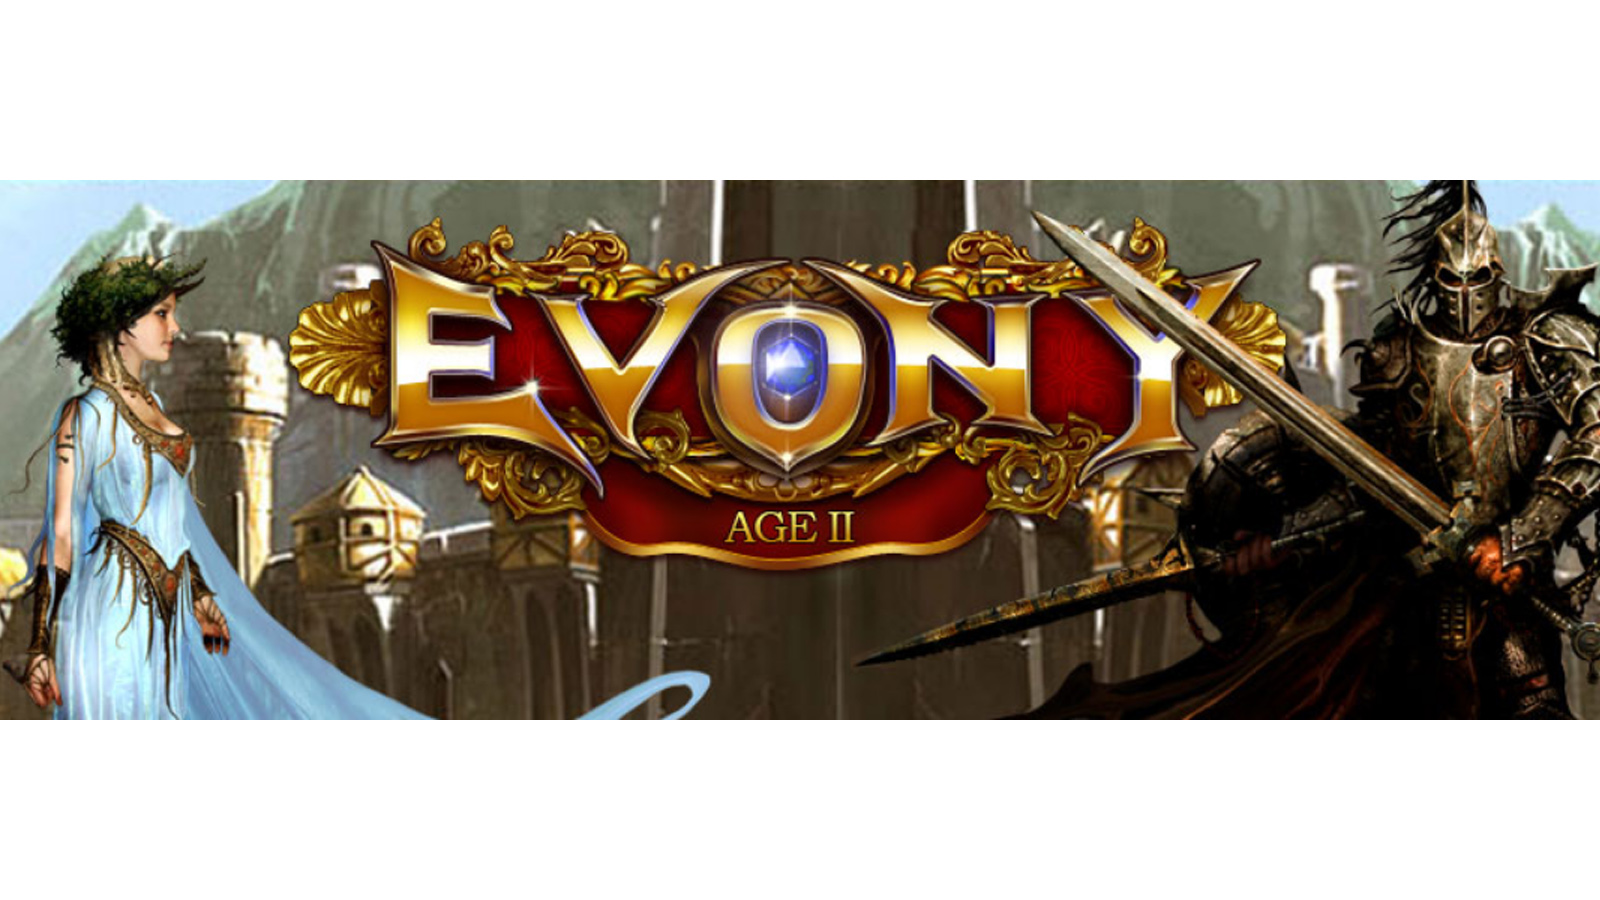 Find detailed information about Evony